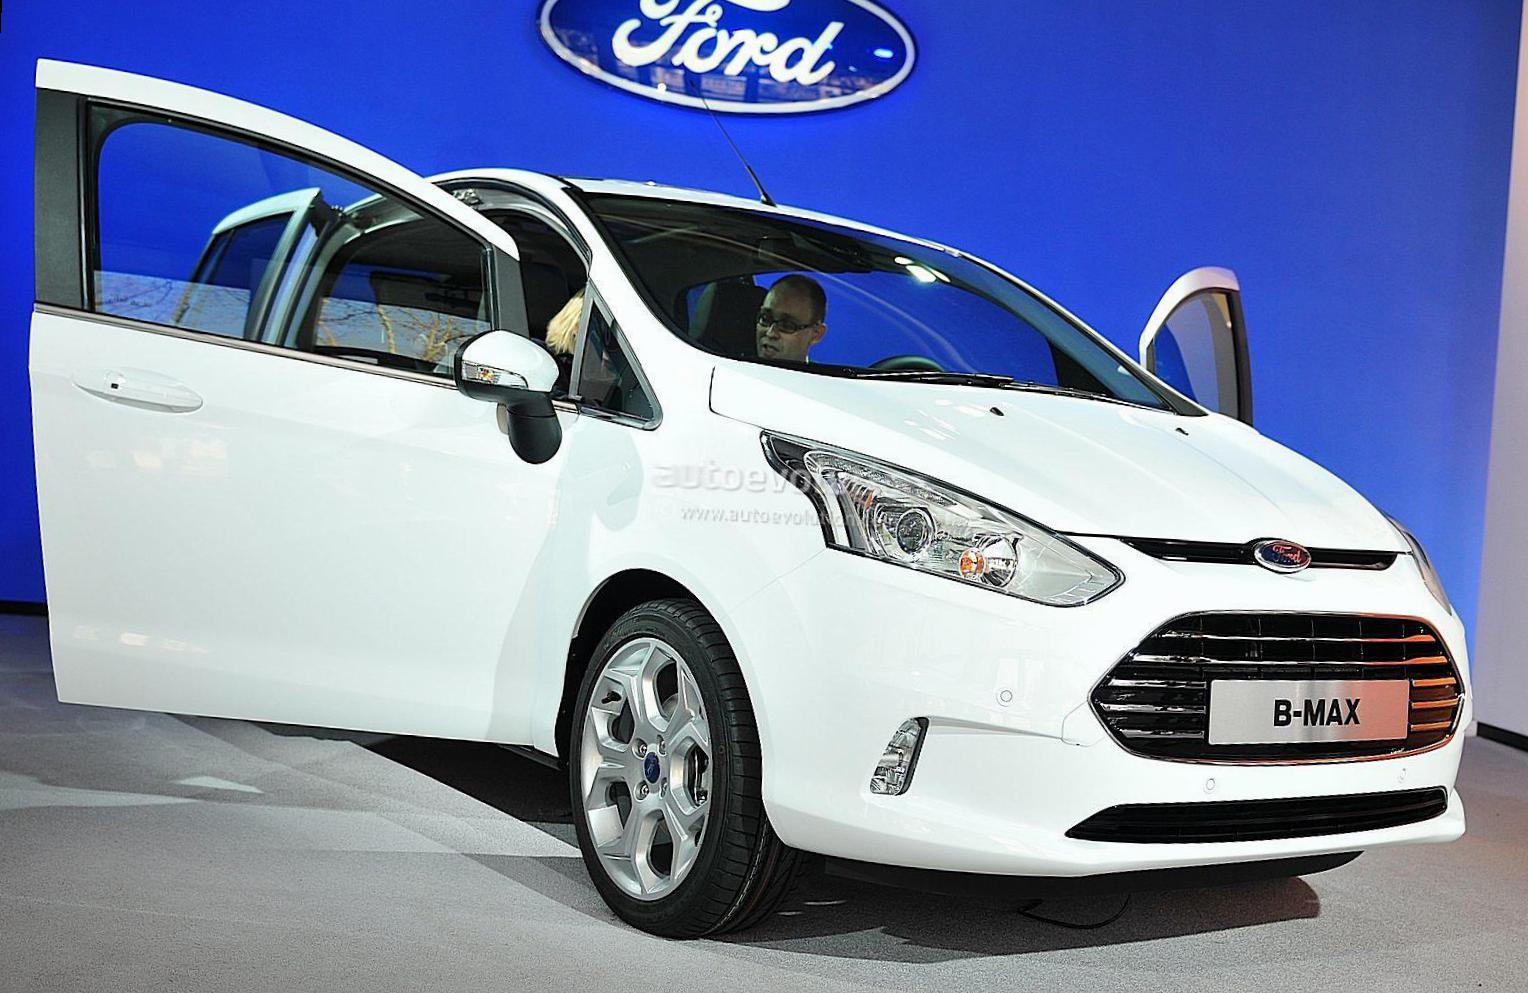 Ford B-Max cost hatchback